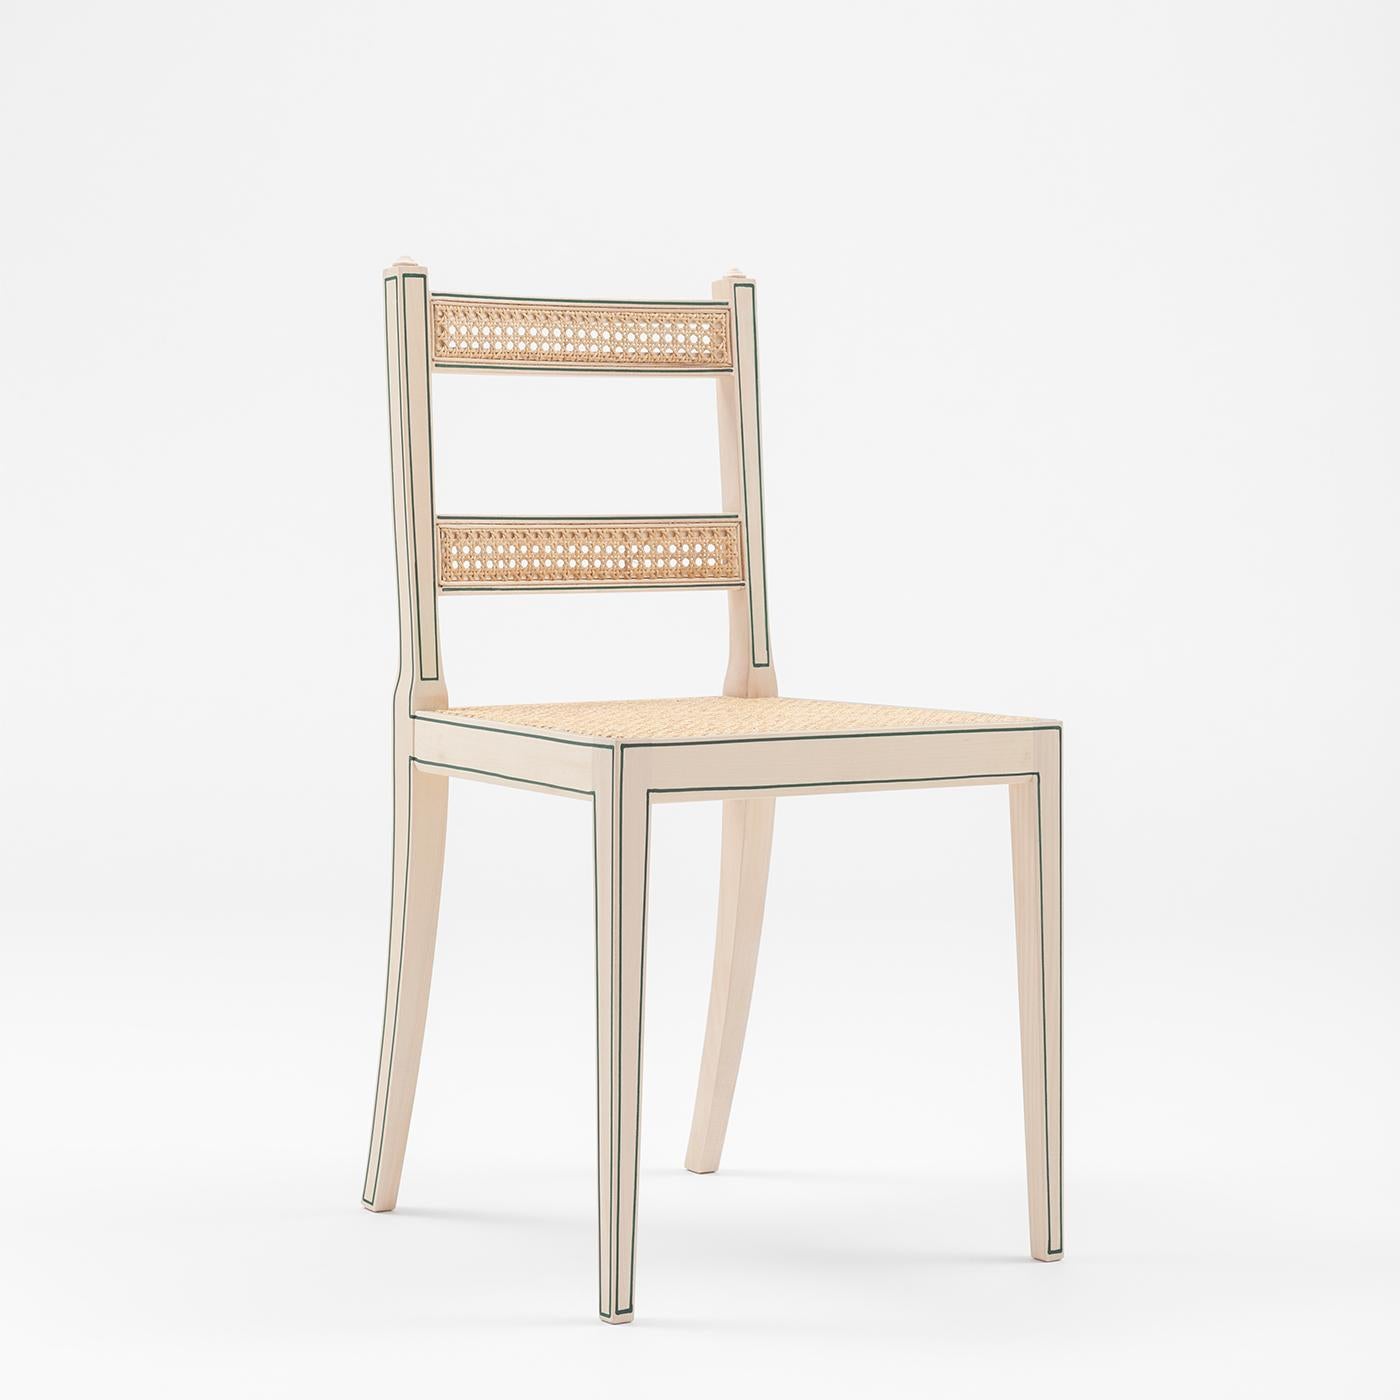 A contemporary interpretation of antique Northern European chairs, this chair boasts a simple aesthetic marked by elegant and refined details. Handcrafted of beechwood finished in a delicate natural shade, it features a sophisticated open backrest